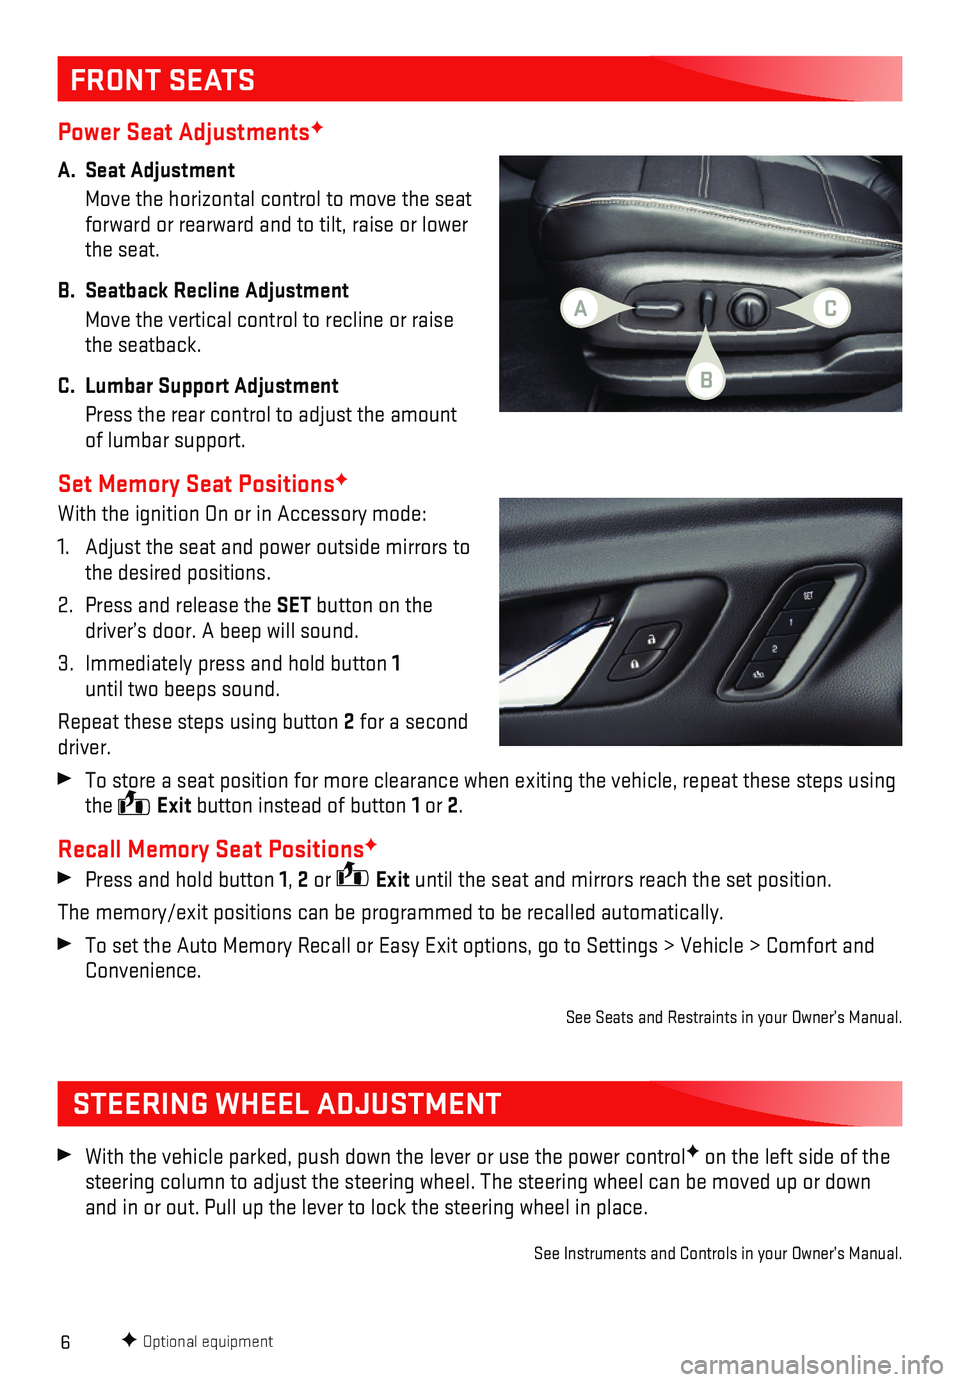 GMC ACADIA 2018  Get To Know Guide 6
Power Seat AdjustmentsF
A. Seat Adjustment 
 Move the horizontal control to move the seat forward or rearward and to tilt, raise or lower the seat. 
B. Seatback Recline Adjustment
 Move the vertical